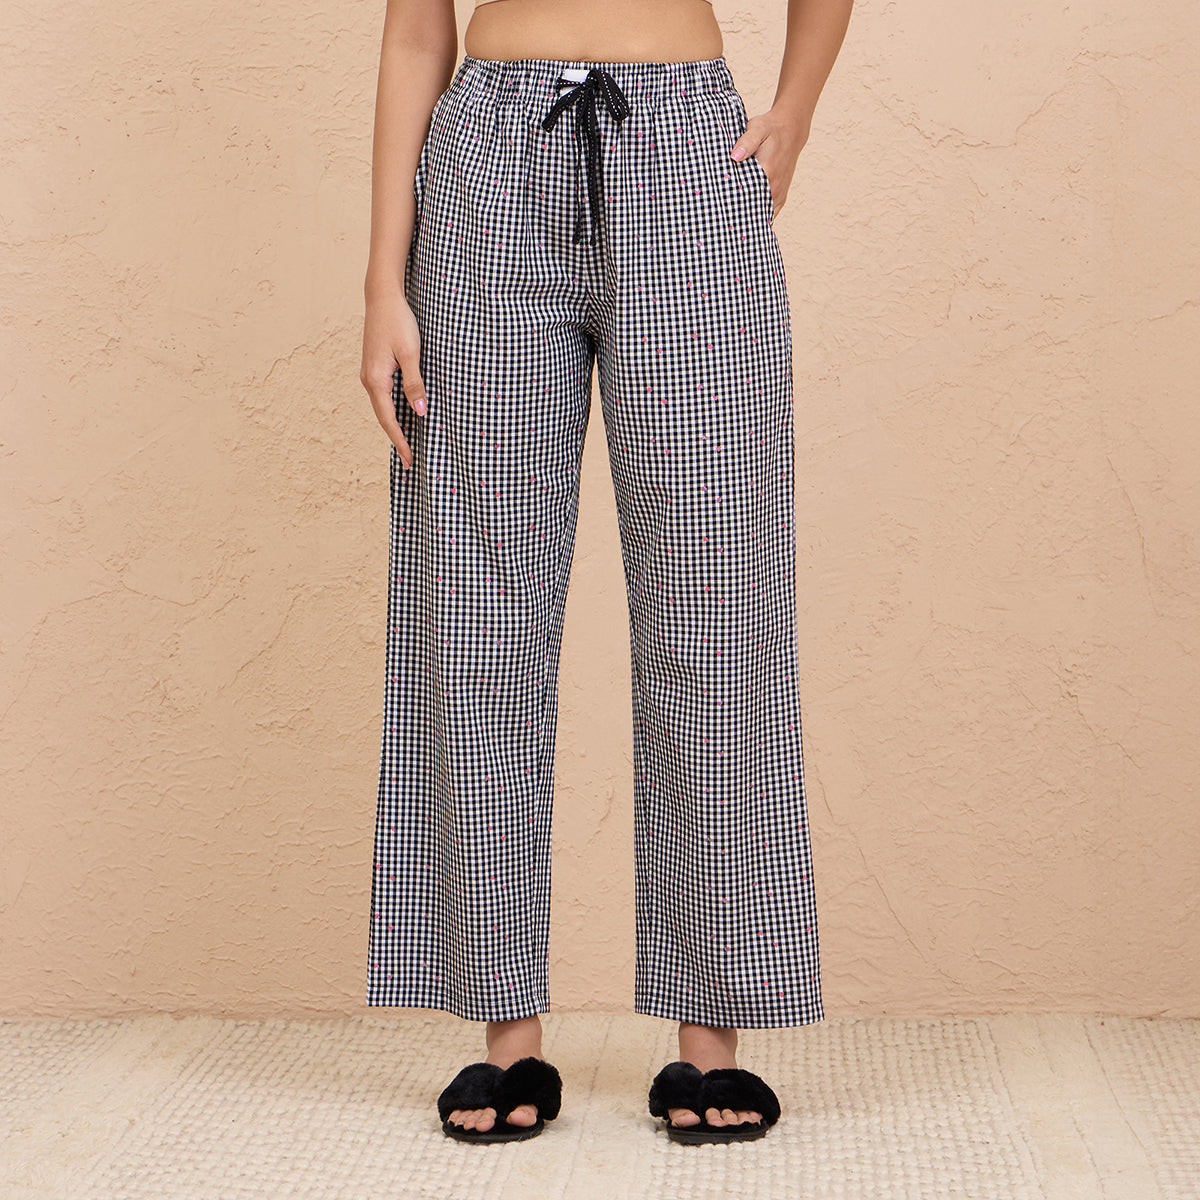 Nykd By Nykaa Super Comfy Cotton Relax Fit Pajama-NYS141-Black Check